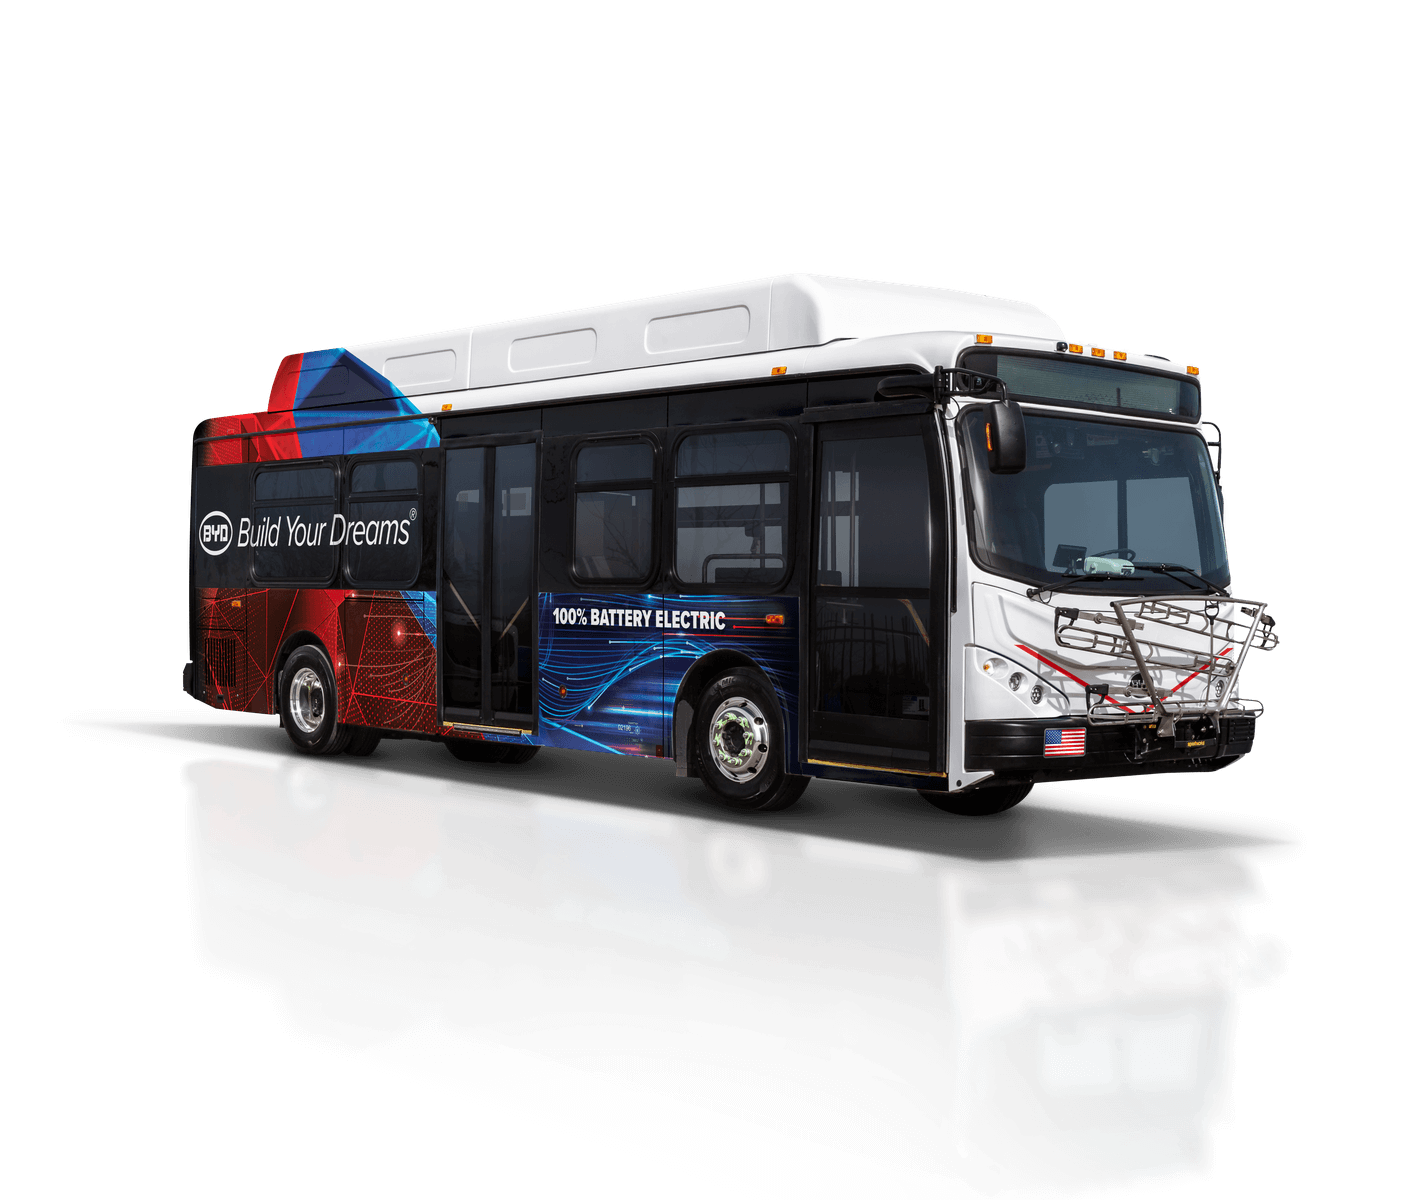 USA, BYD has sold two e-buses in Annapolis (Maryland)